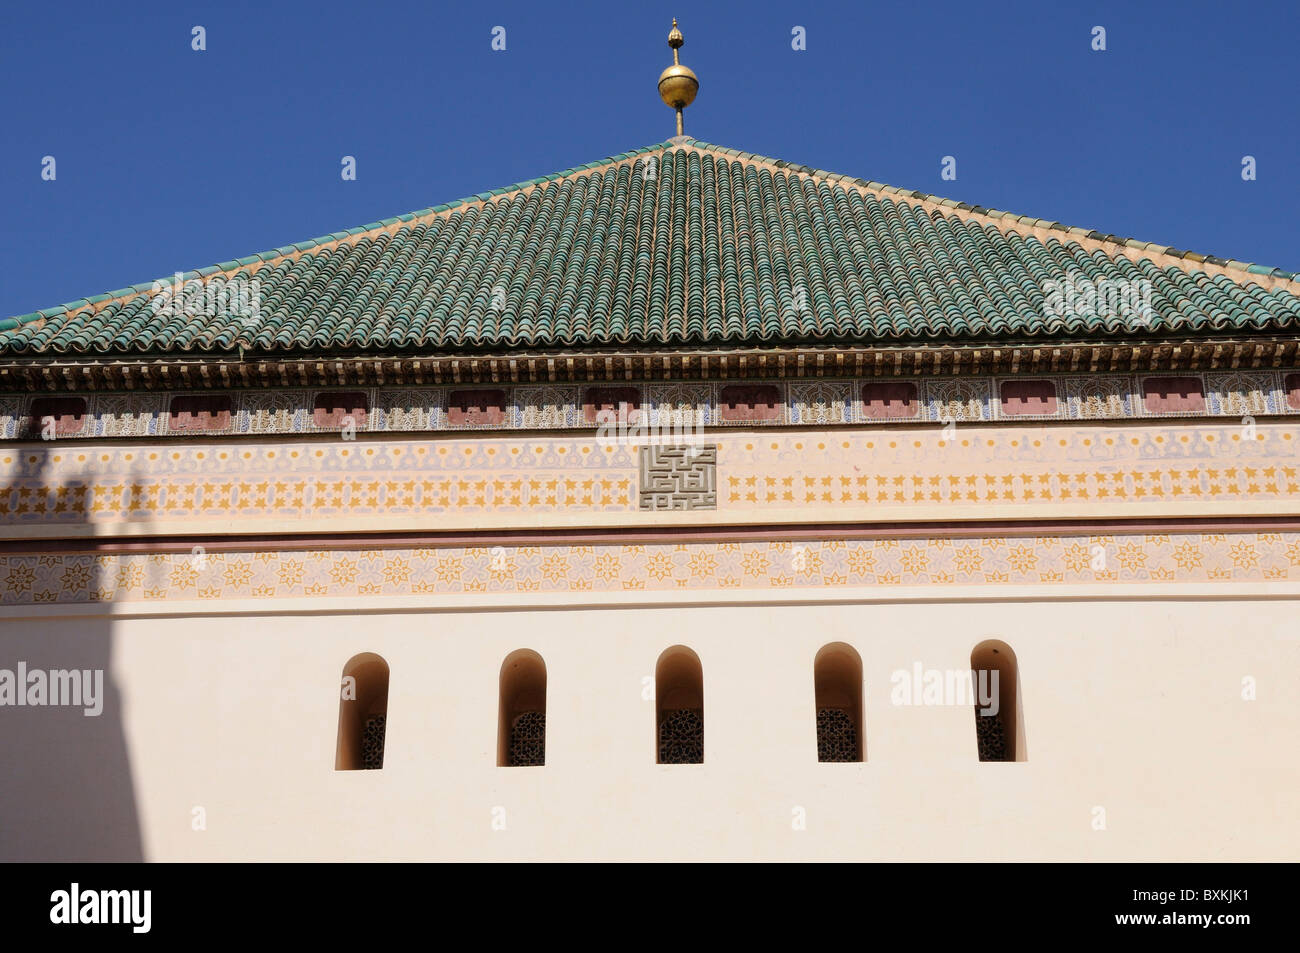 Green Sale tiled roof of Bel Abbes Sidi Zaouia in Marrakech Stock Photo